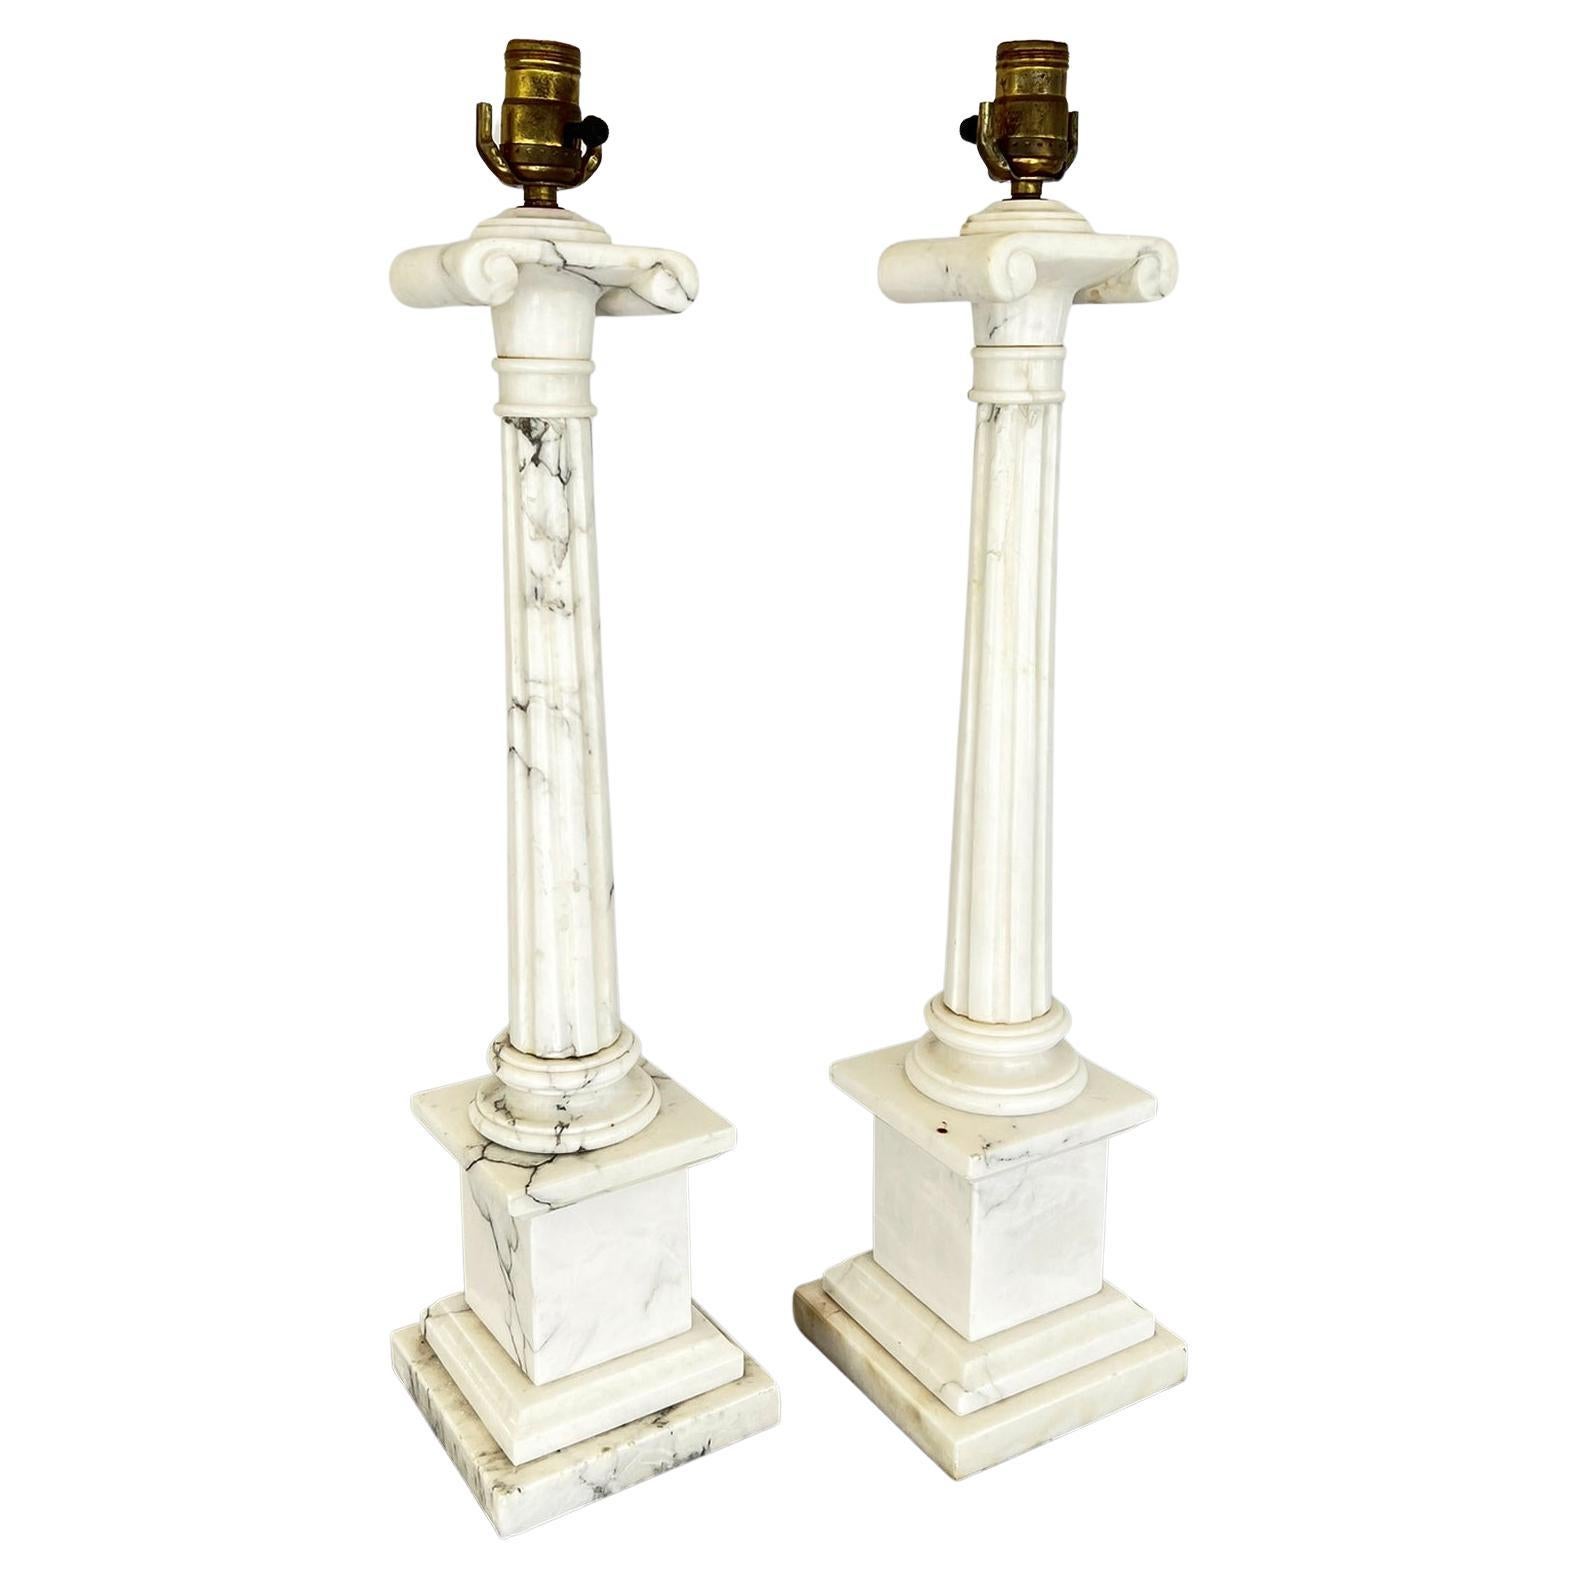 Pair of Vintage Italian Alabaster Columnar Lamps with Ionic Capitals